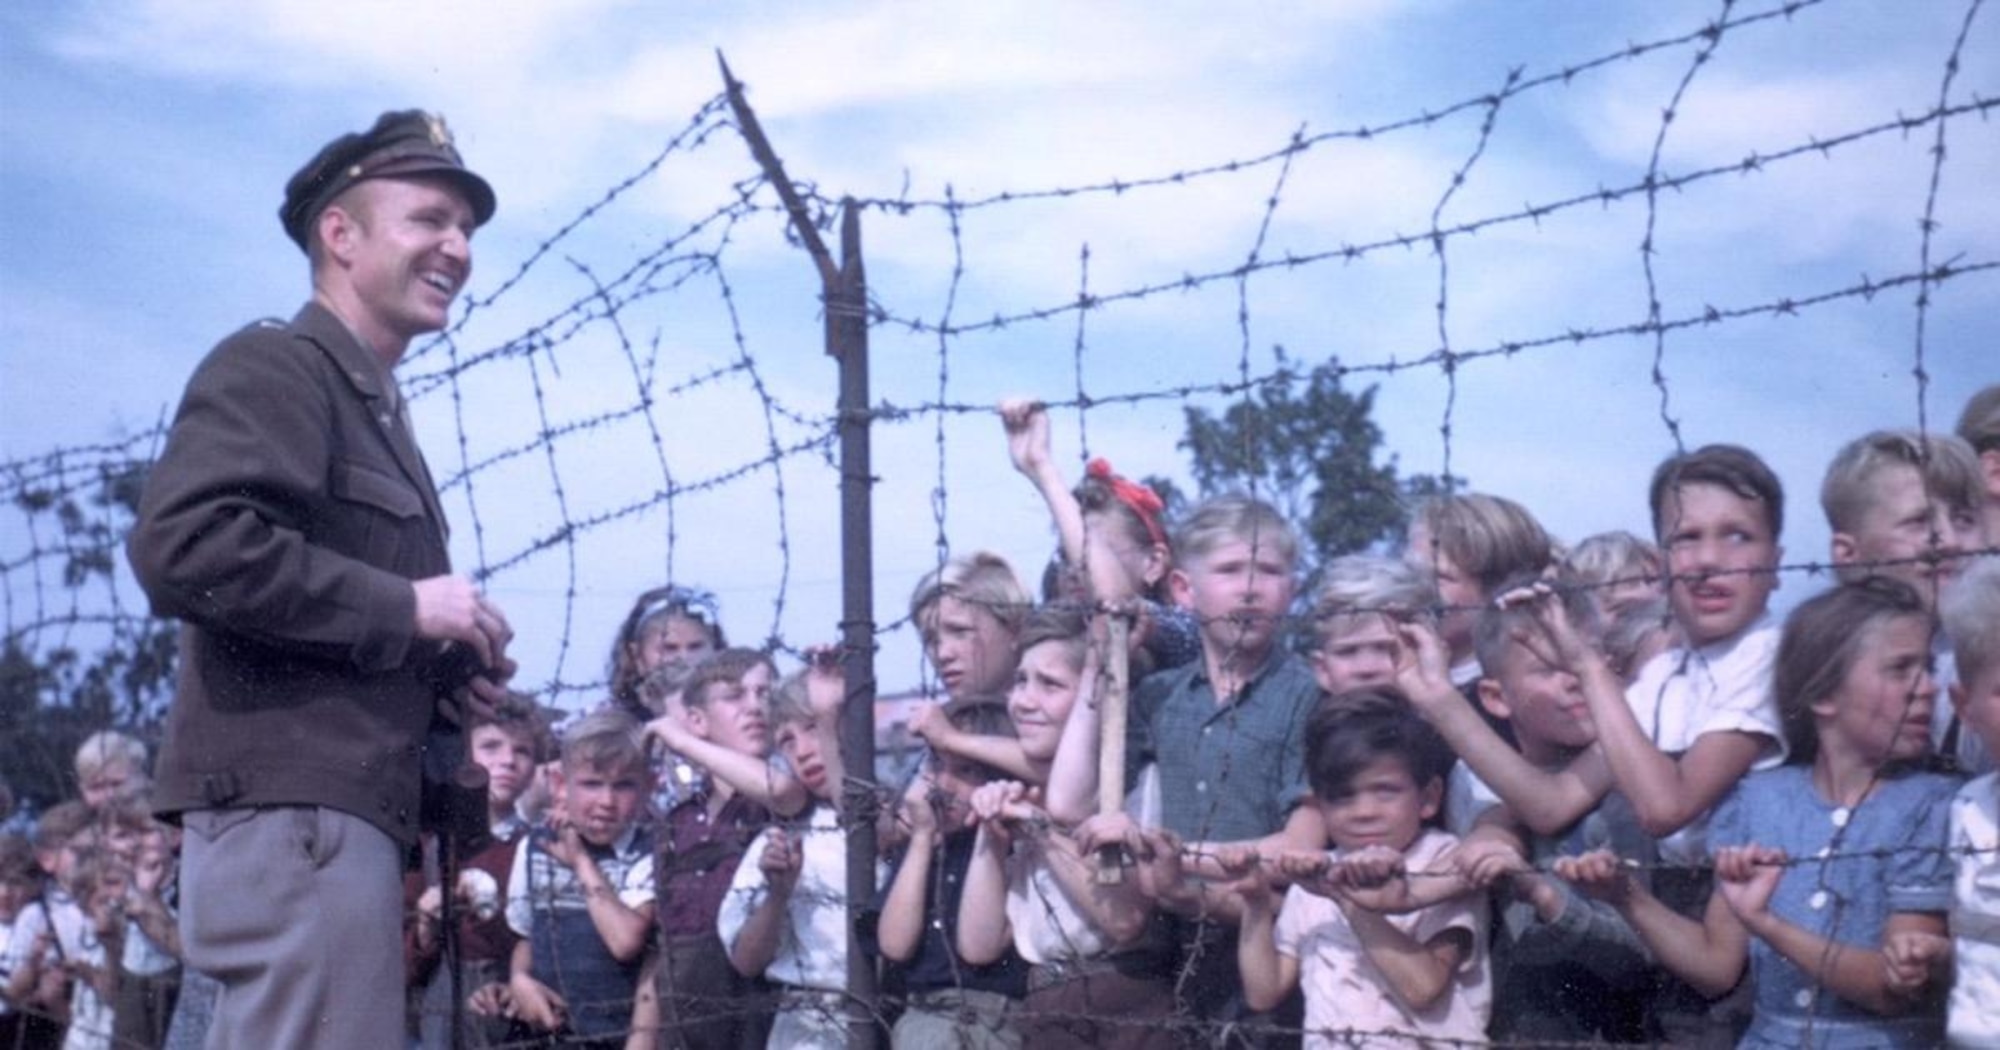 Lt. Gail Halvorsen, �The Candy Bomber," greets children of isolated West Berlin sometime during 1948-49 after dropping candy bars from the air on tiny parachutes. (U.S. Air Force photo)